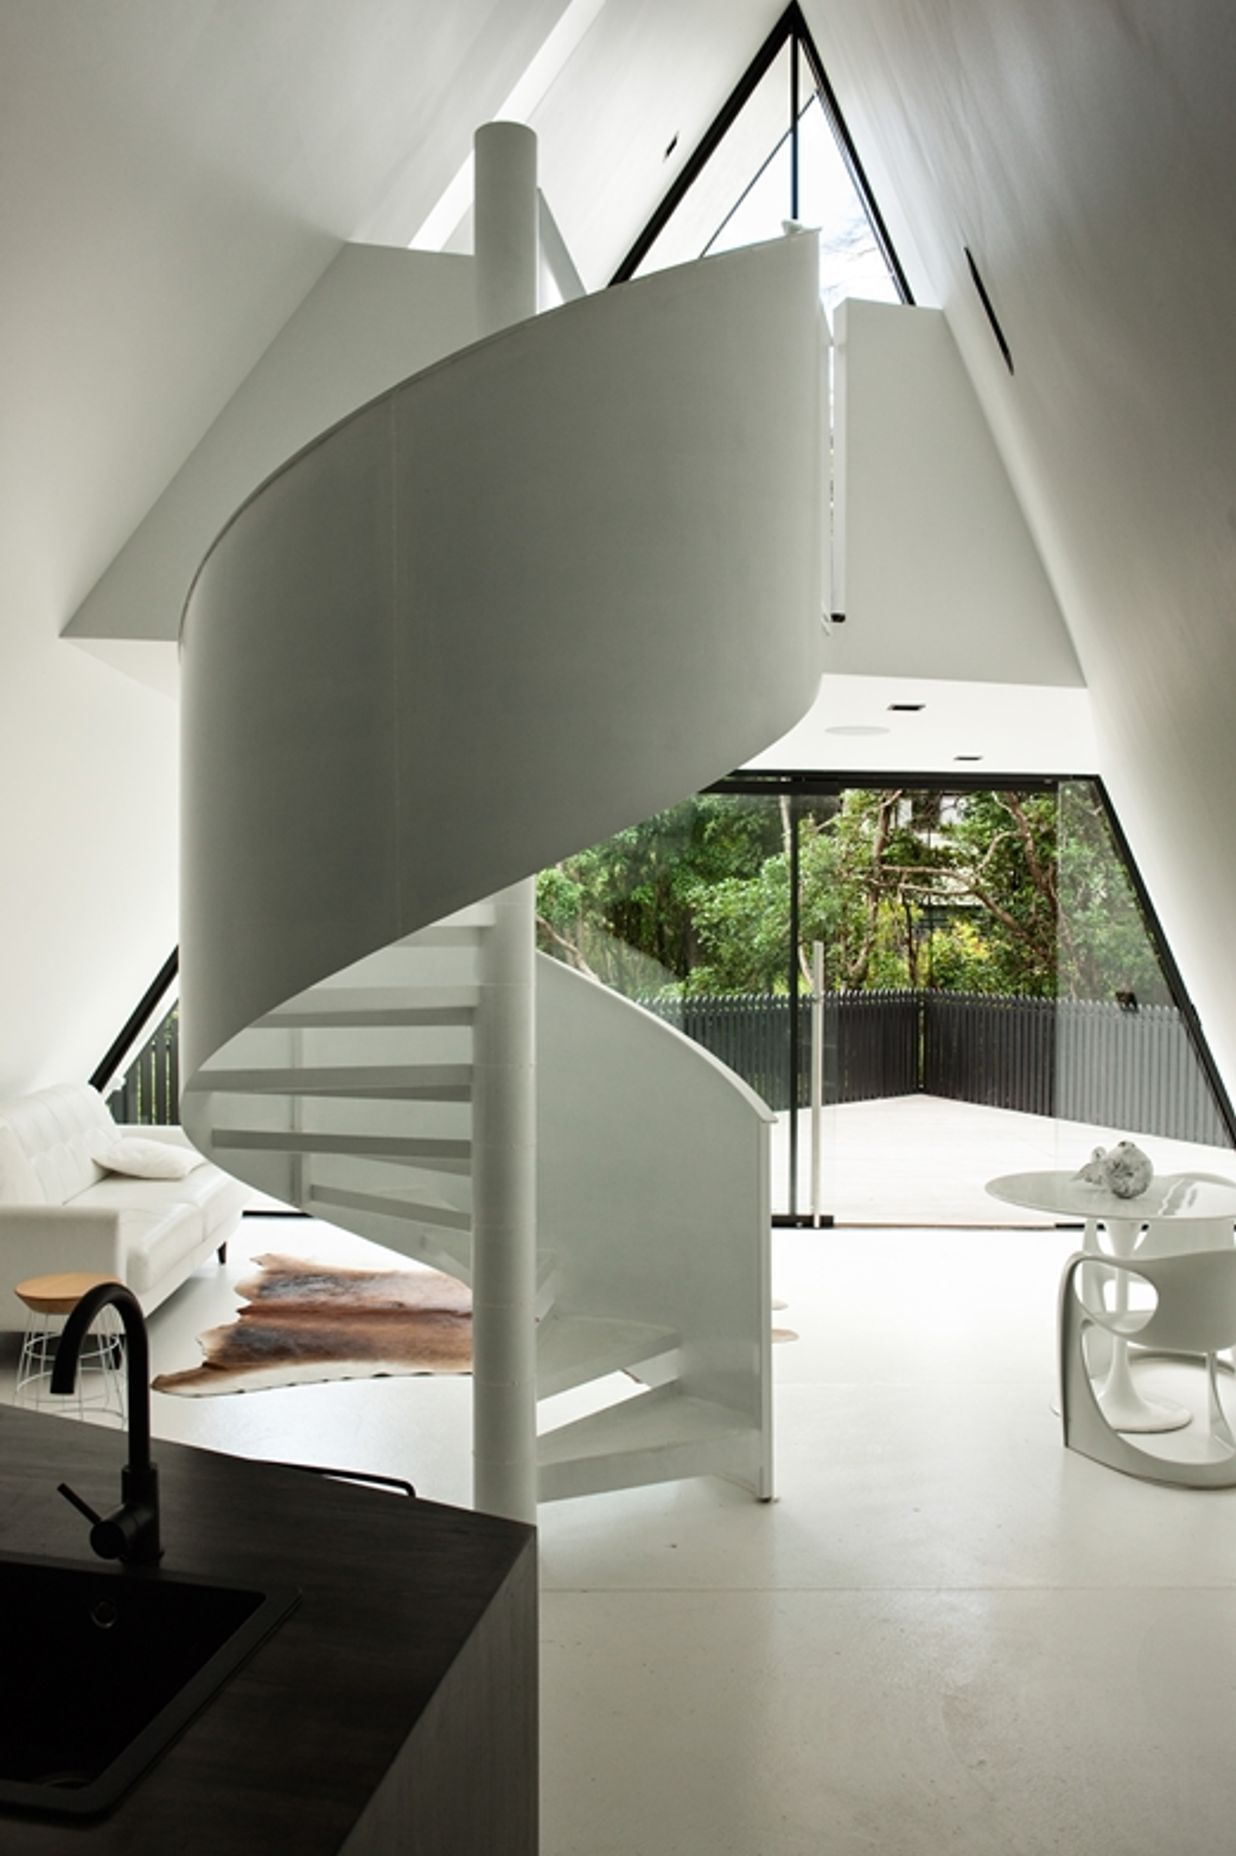 A spiral staircase is a statement feature of Chris Tate's Tent House